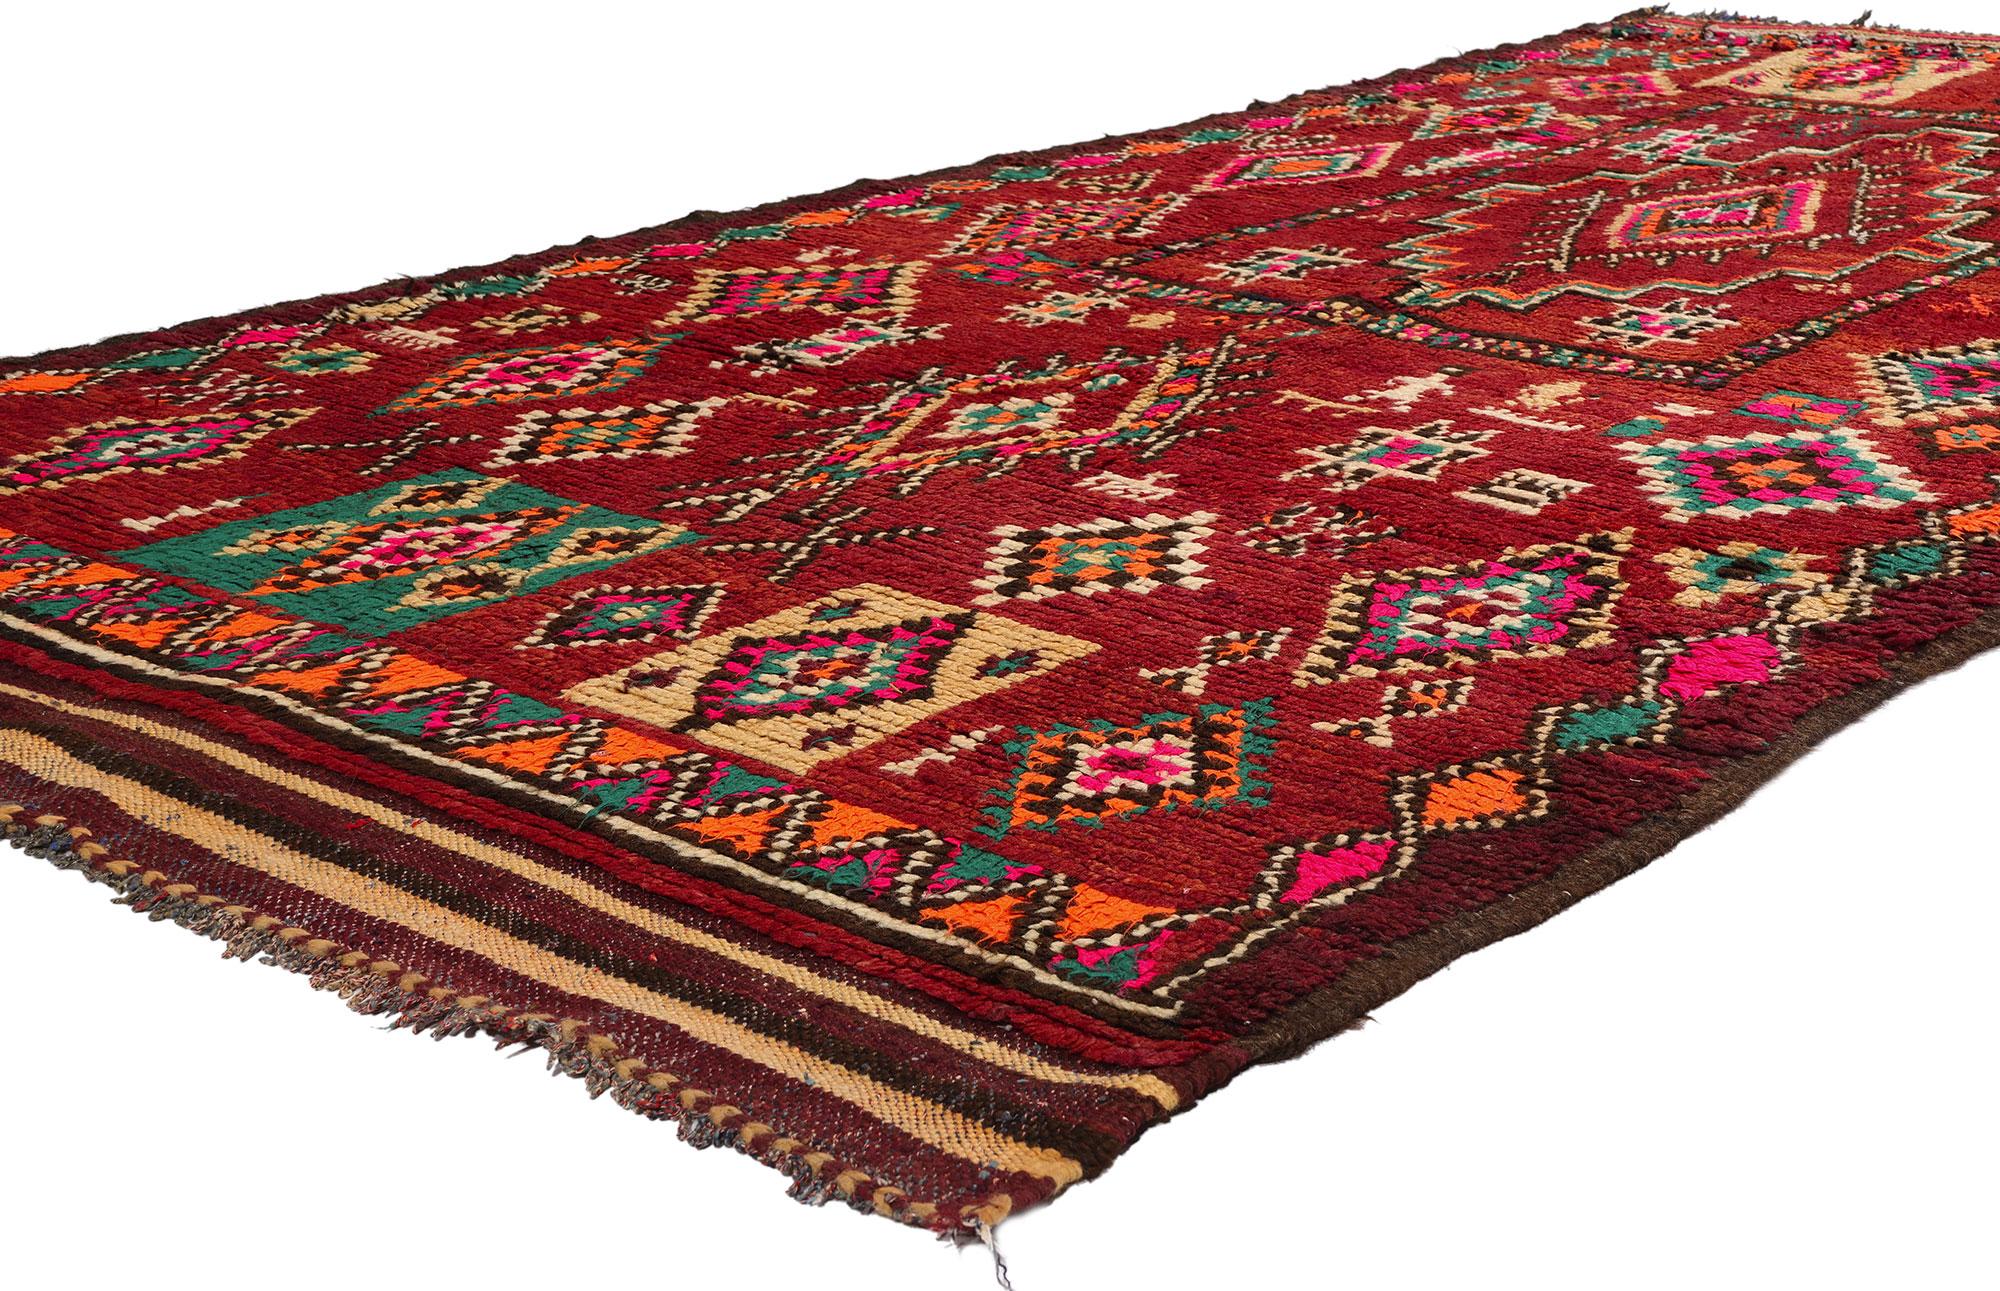 21840 Vintage Red Taznakht Moroccan Rug, 04'09 x 09'10. Embark on a voyage through the profound heritage of the Taznakht Tribe, where adept hands in the southern High Atlas Mountains of Morocco intricately crafted this vintage Berber Moroccan rug